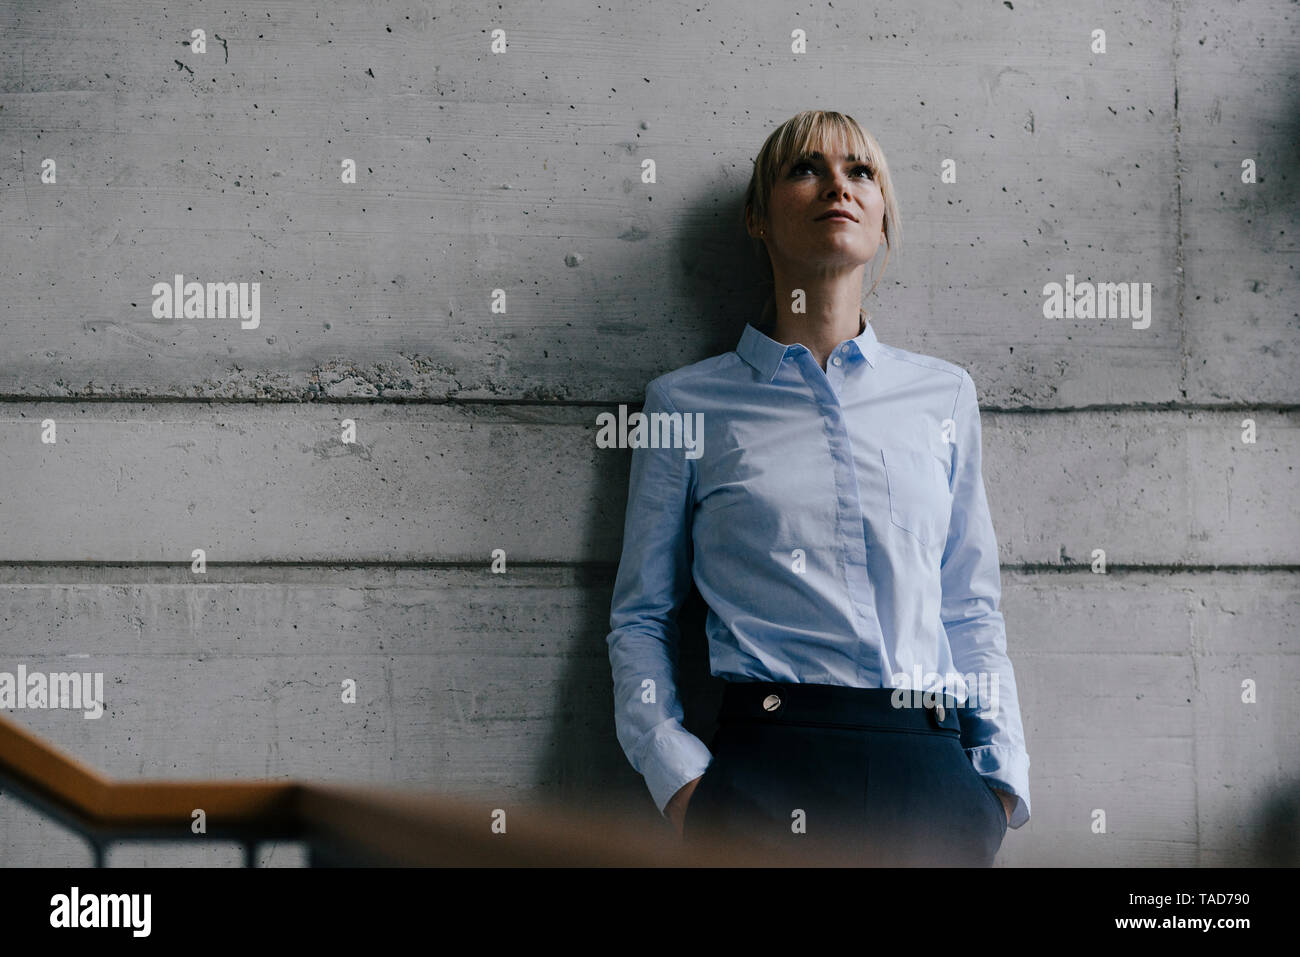 Businesswoman leaning on concrete wall, looking up Stock Photo